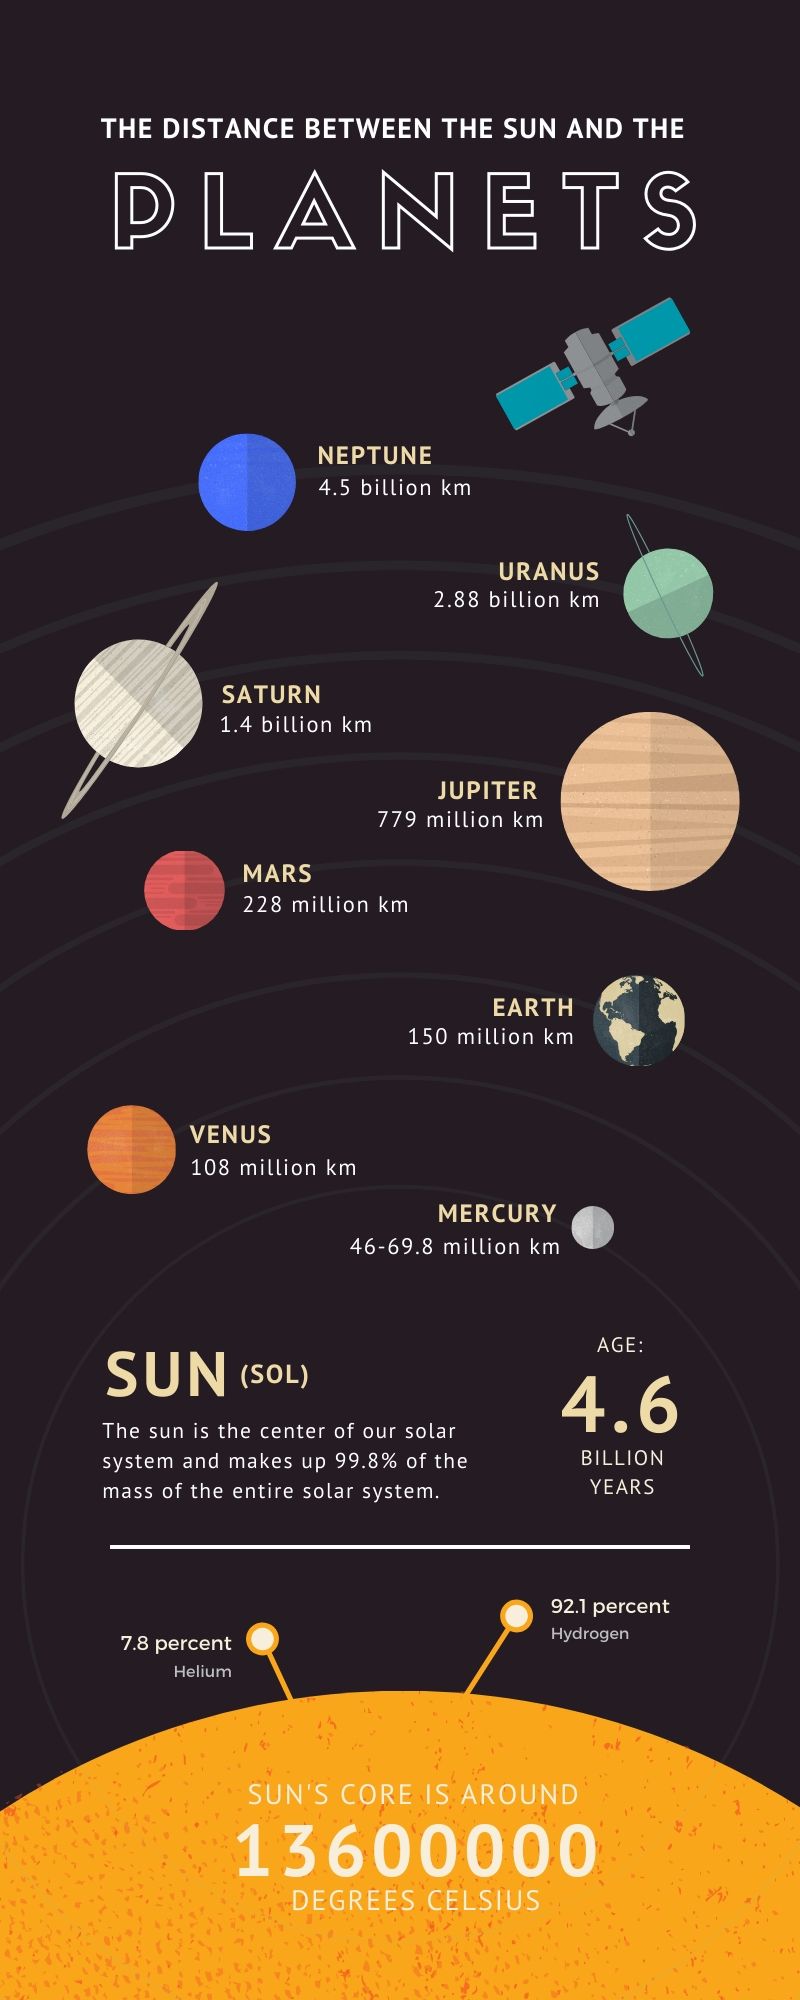 Age and temperature of sun and distance between the sun and the planets